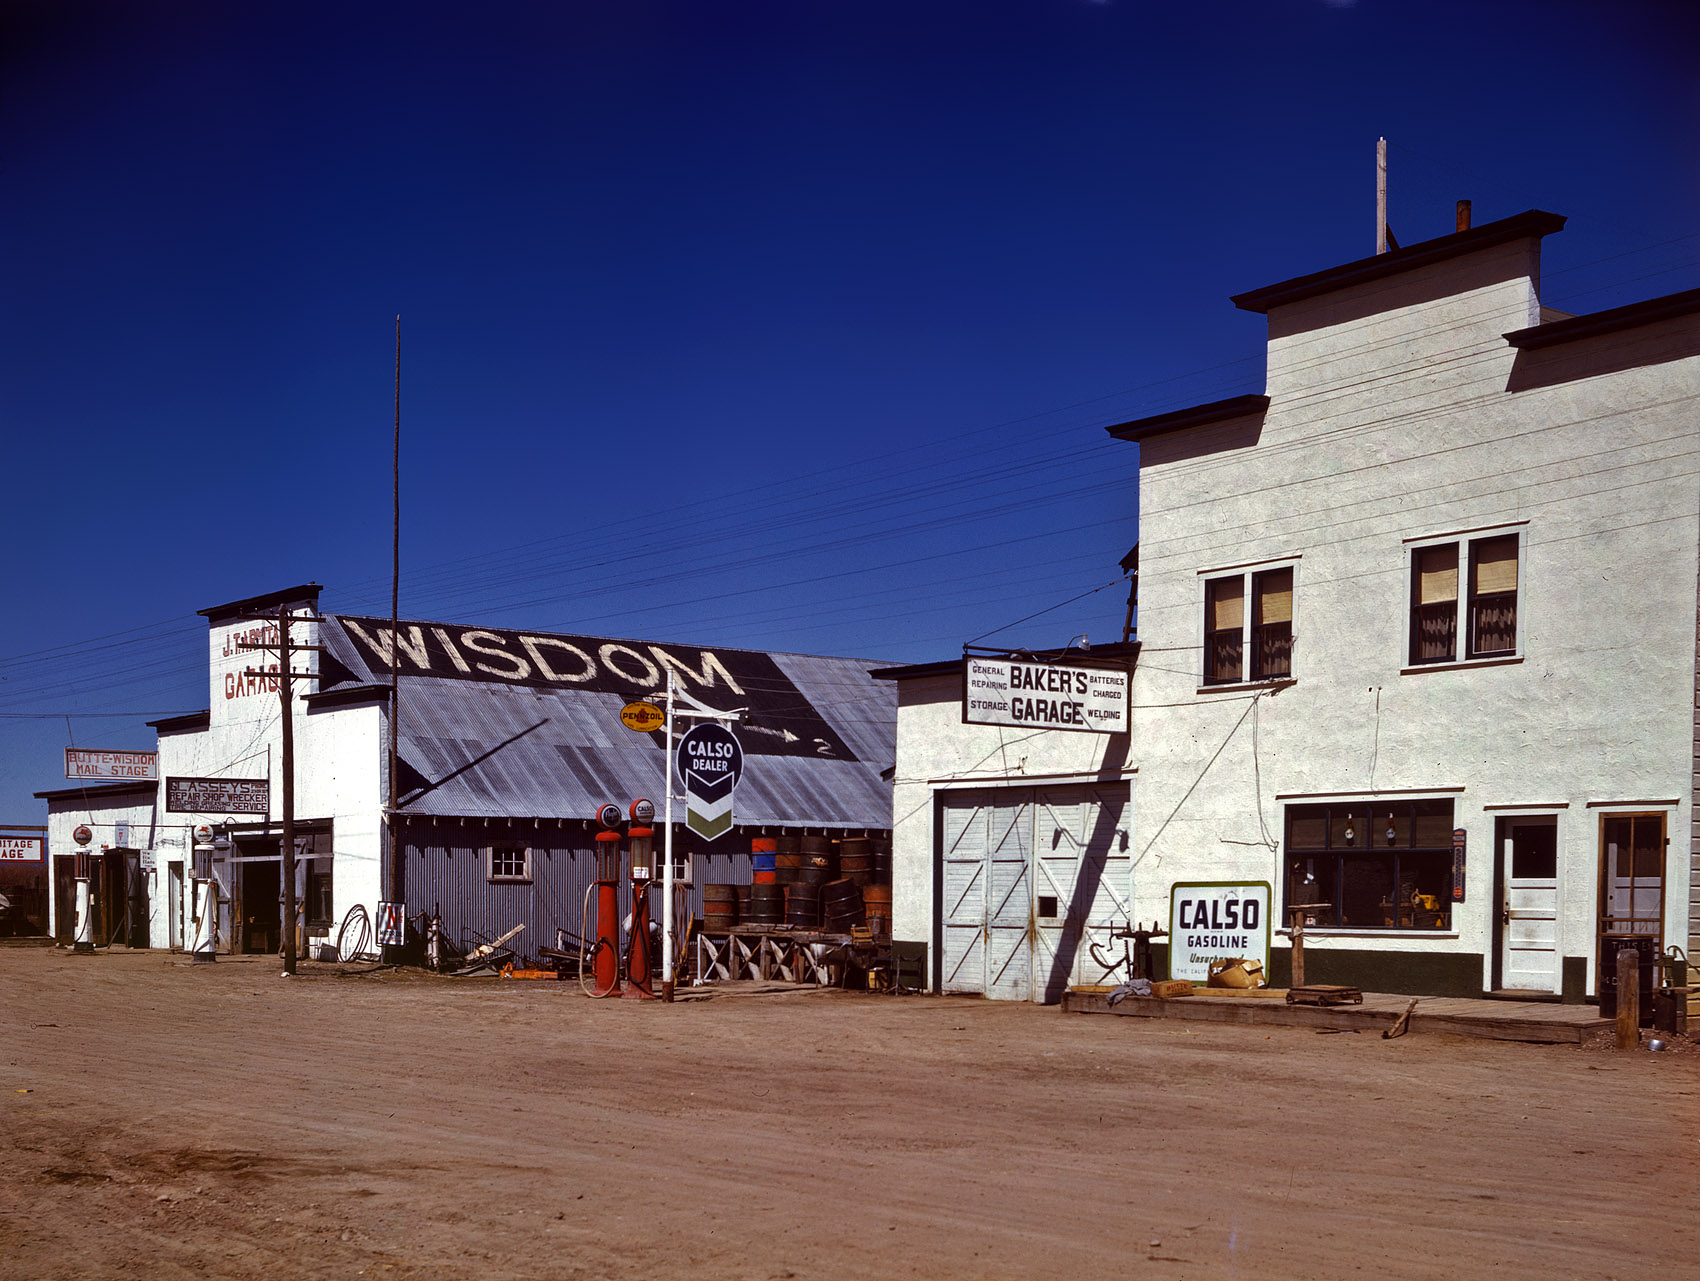 April 1942. "Baker's Garage in Wisdom, Montana. Largest town, population 385, in the Big Hole Basin, a trading center in ranching country." 4x5 Kodachrome transparency by John Vachon for the Office of War Information. View full size.